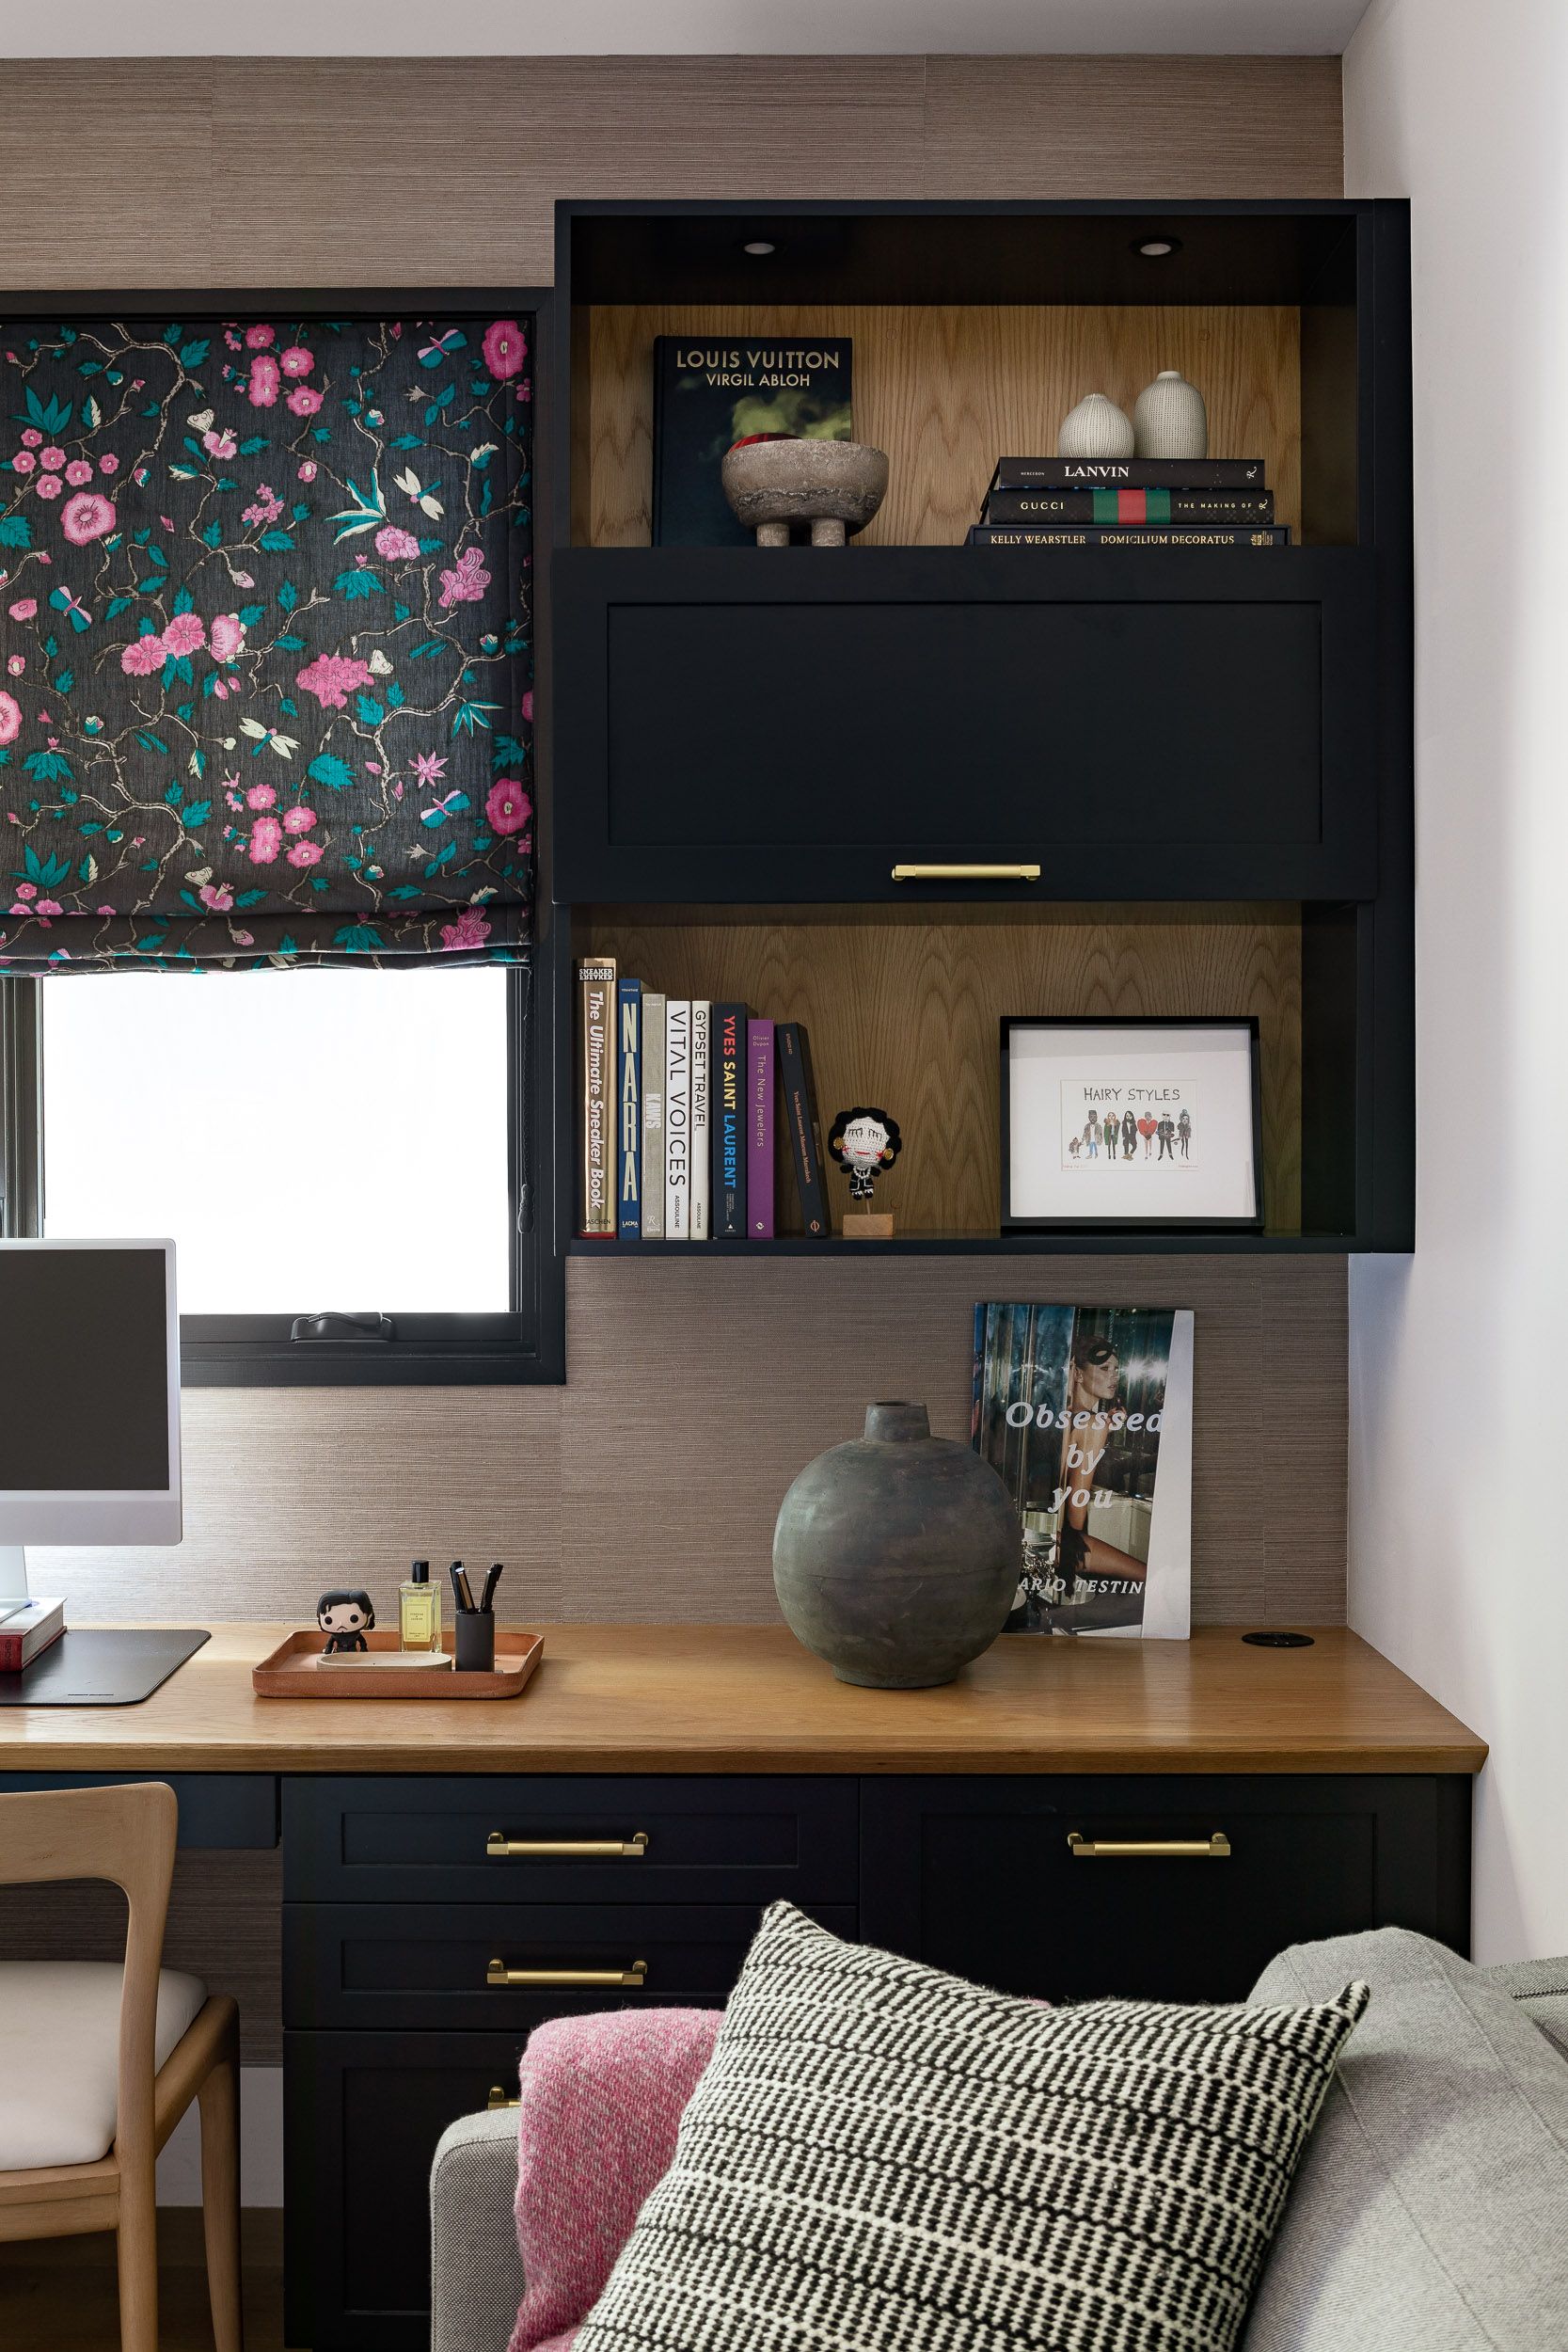 13 Must-Have Home Office Organization Ideas (With Photos!)